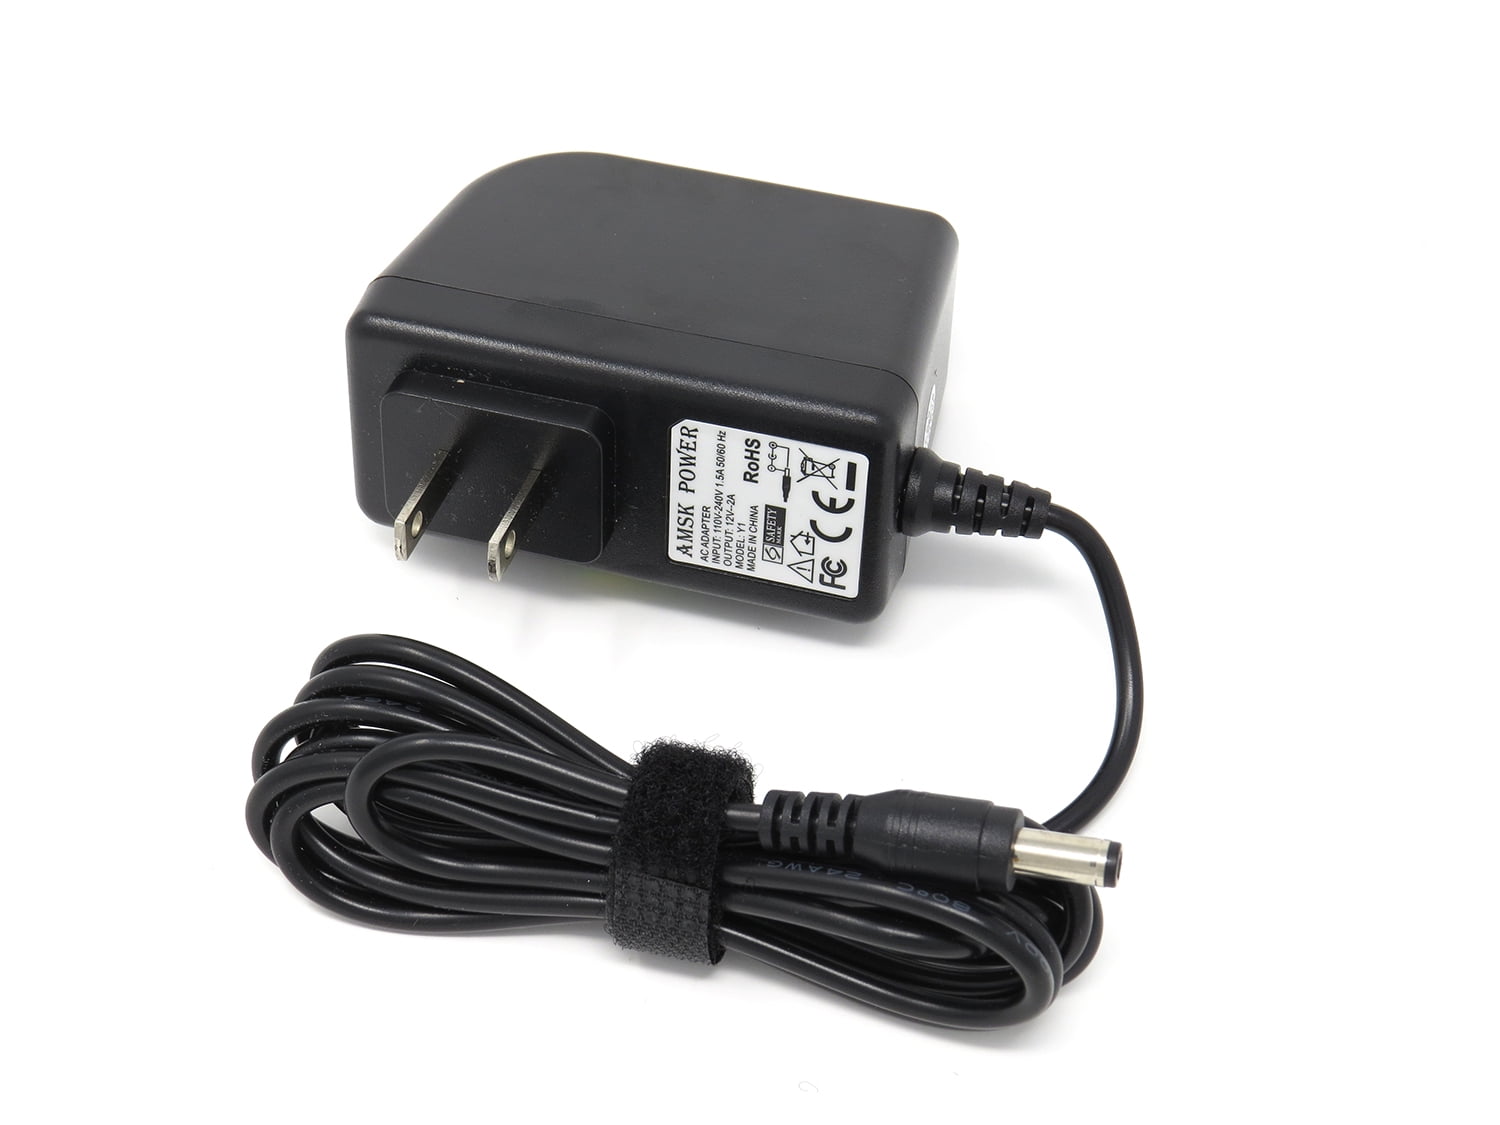 yan AC DC Adapter Power Network Cord for Clear WIXFBR-131 Clearwire Hub Modem Router 